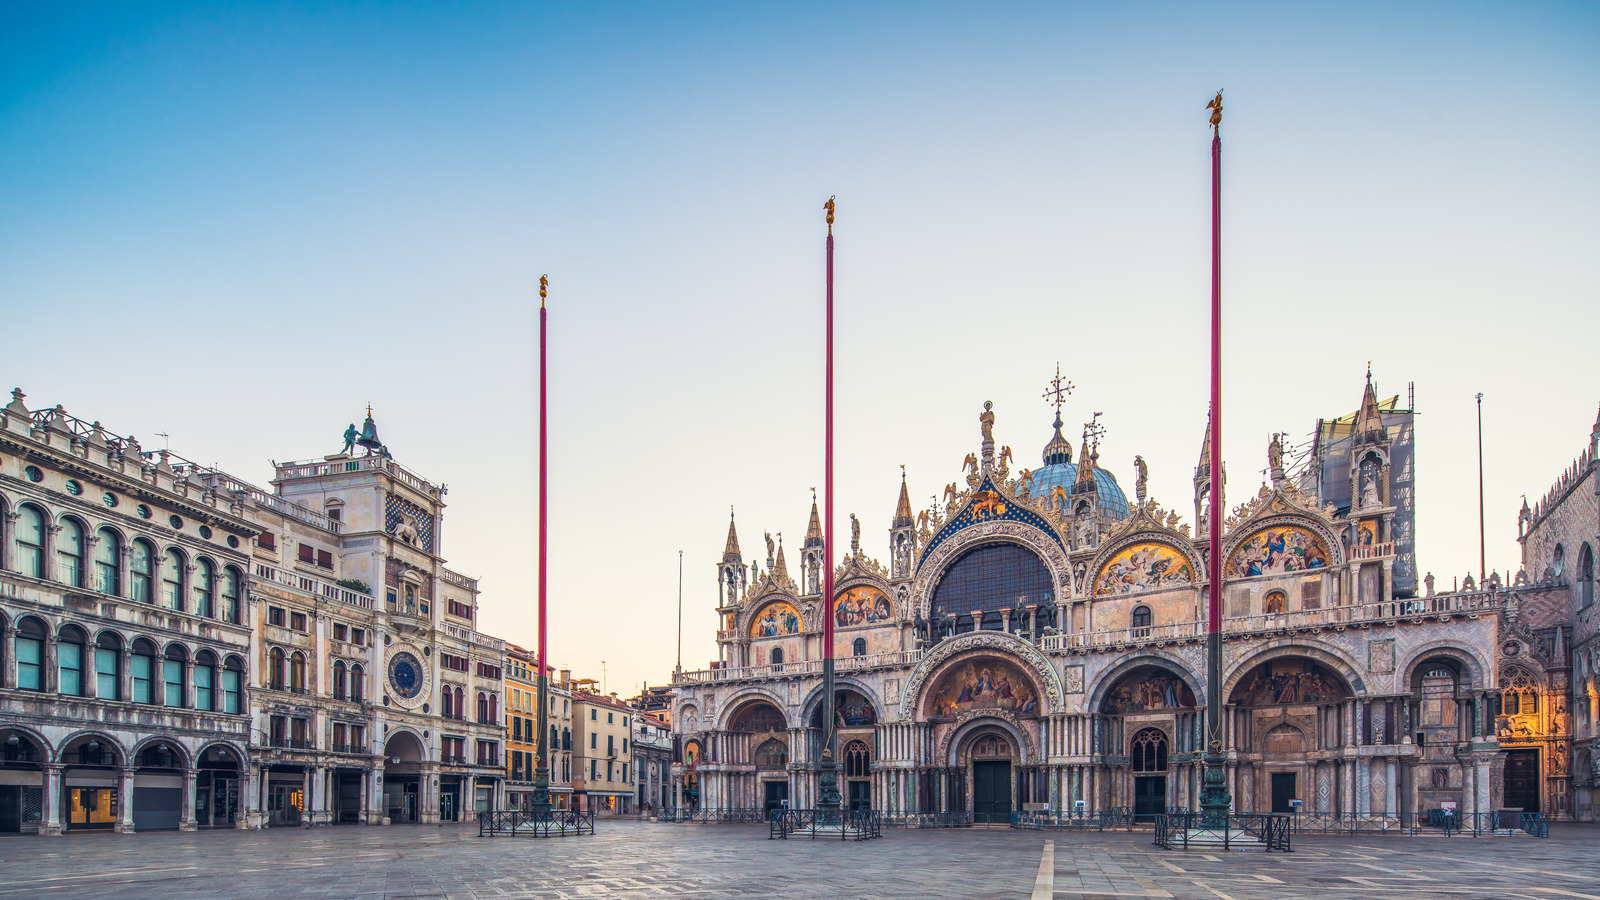 This Italian City Is A Great Destination For History Buffs To Add To Their Bucket Lists 0106